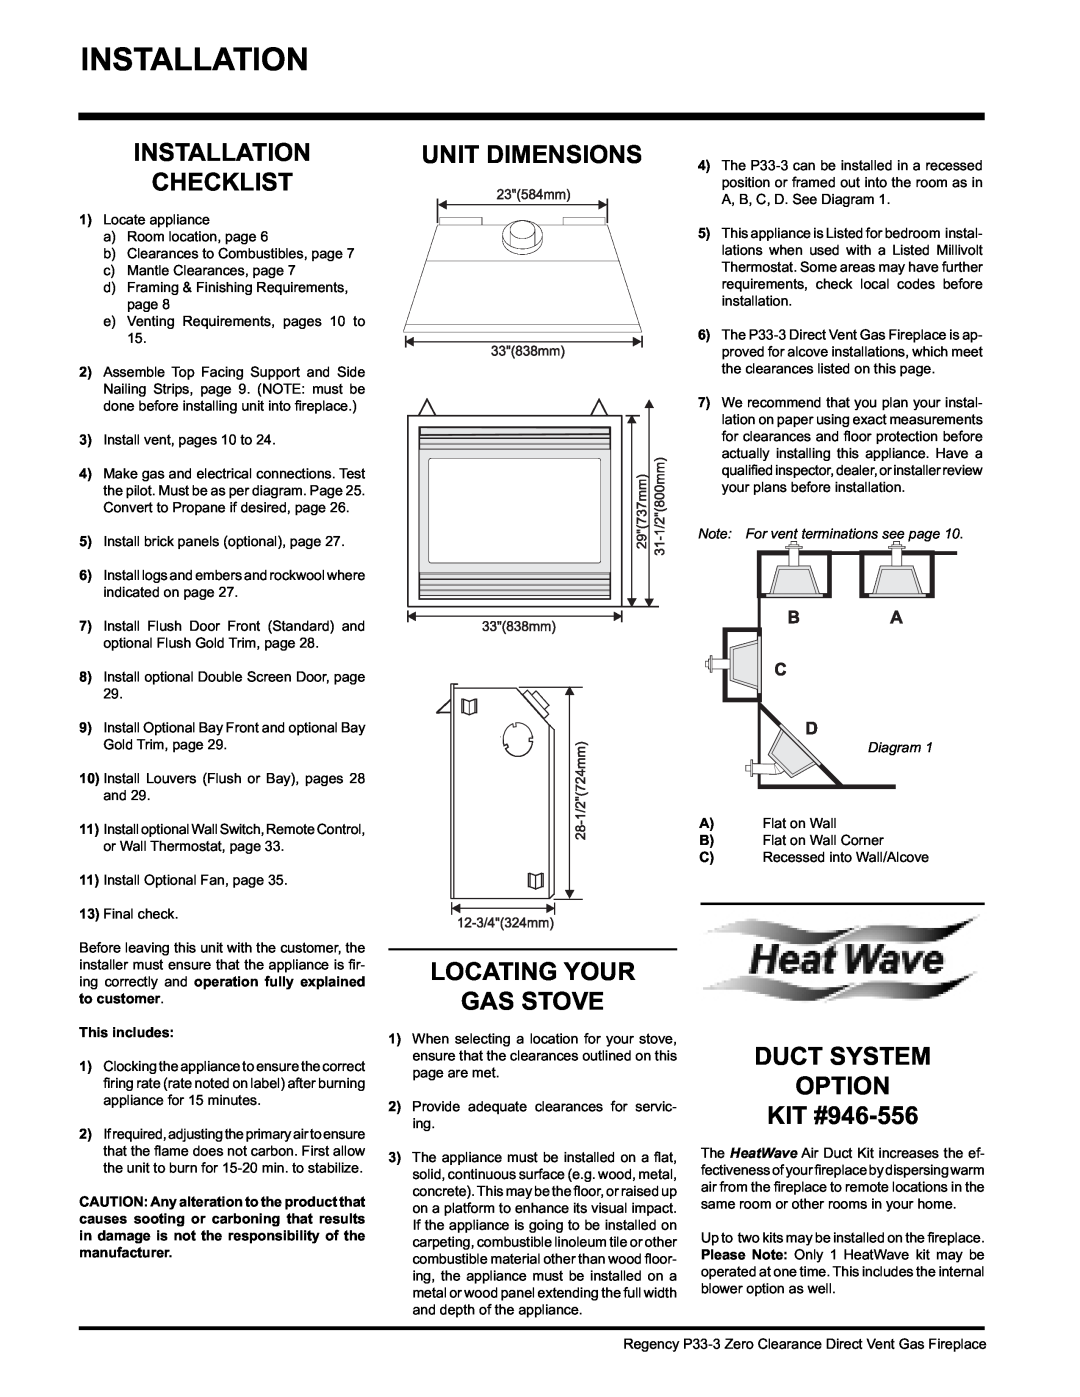 Regency P33-LP3, P33-NG3 Installation Checklist, Unit Dimensions, Locating Your Gas Stove, DUCT SYSTEM OPTION KIT #946-556 